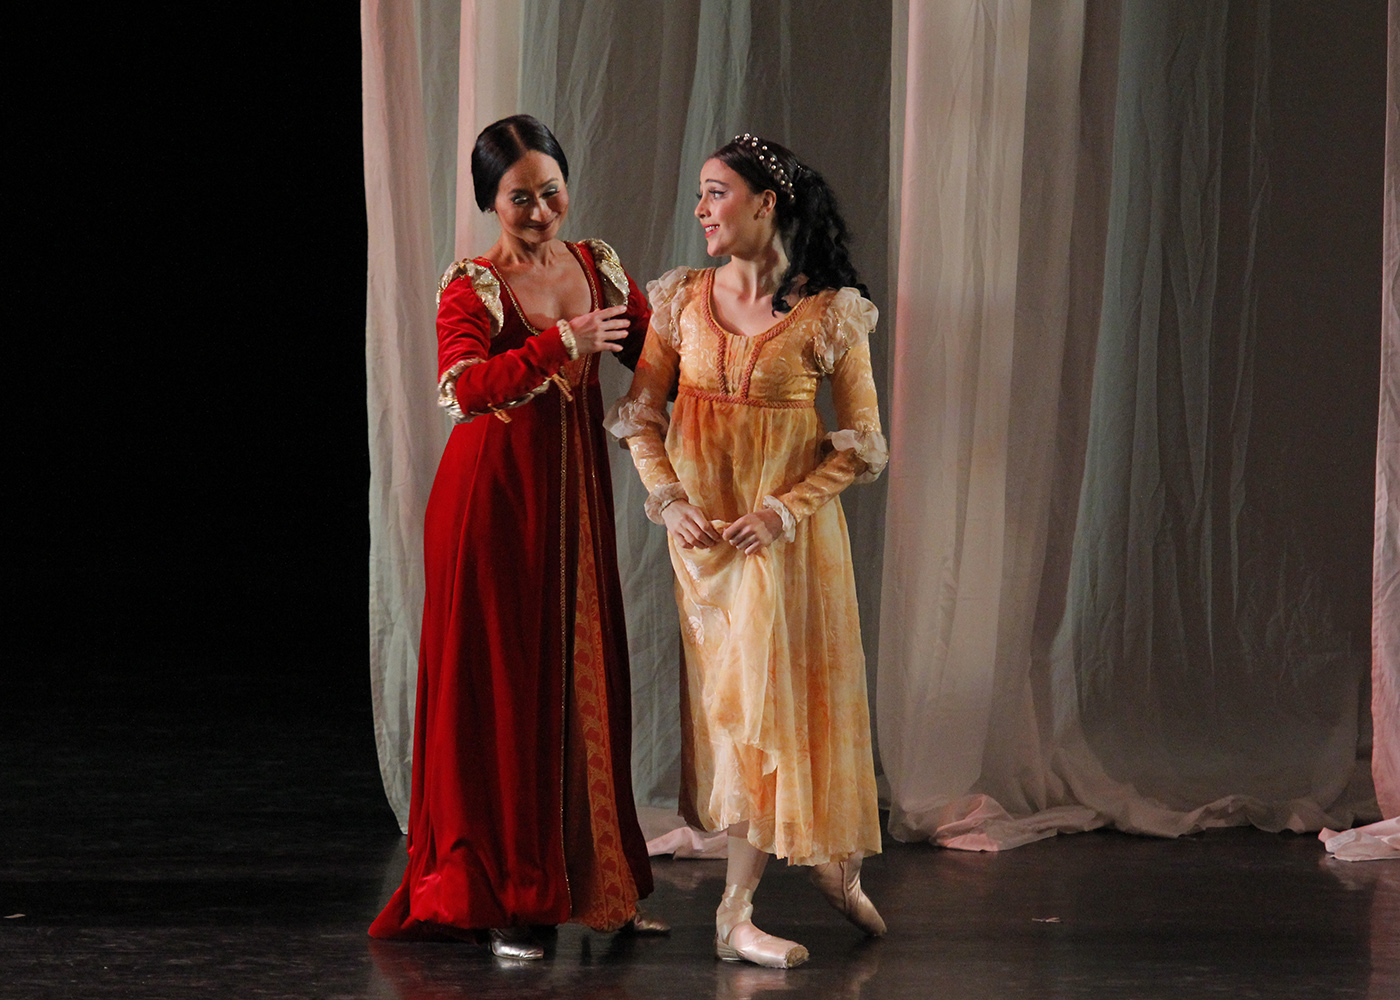 Katherine Barkman received a citation for her performance as Juliet in Romeo and Juliet. Essaying the role of her mother, Lady Capulet, was Ballet Manila’s Artistic Director and CEO, Lisa Macuja-Elizalde.